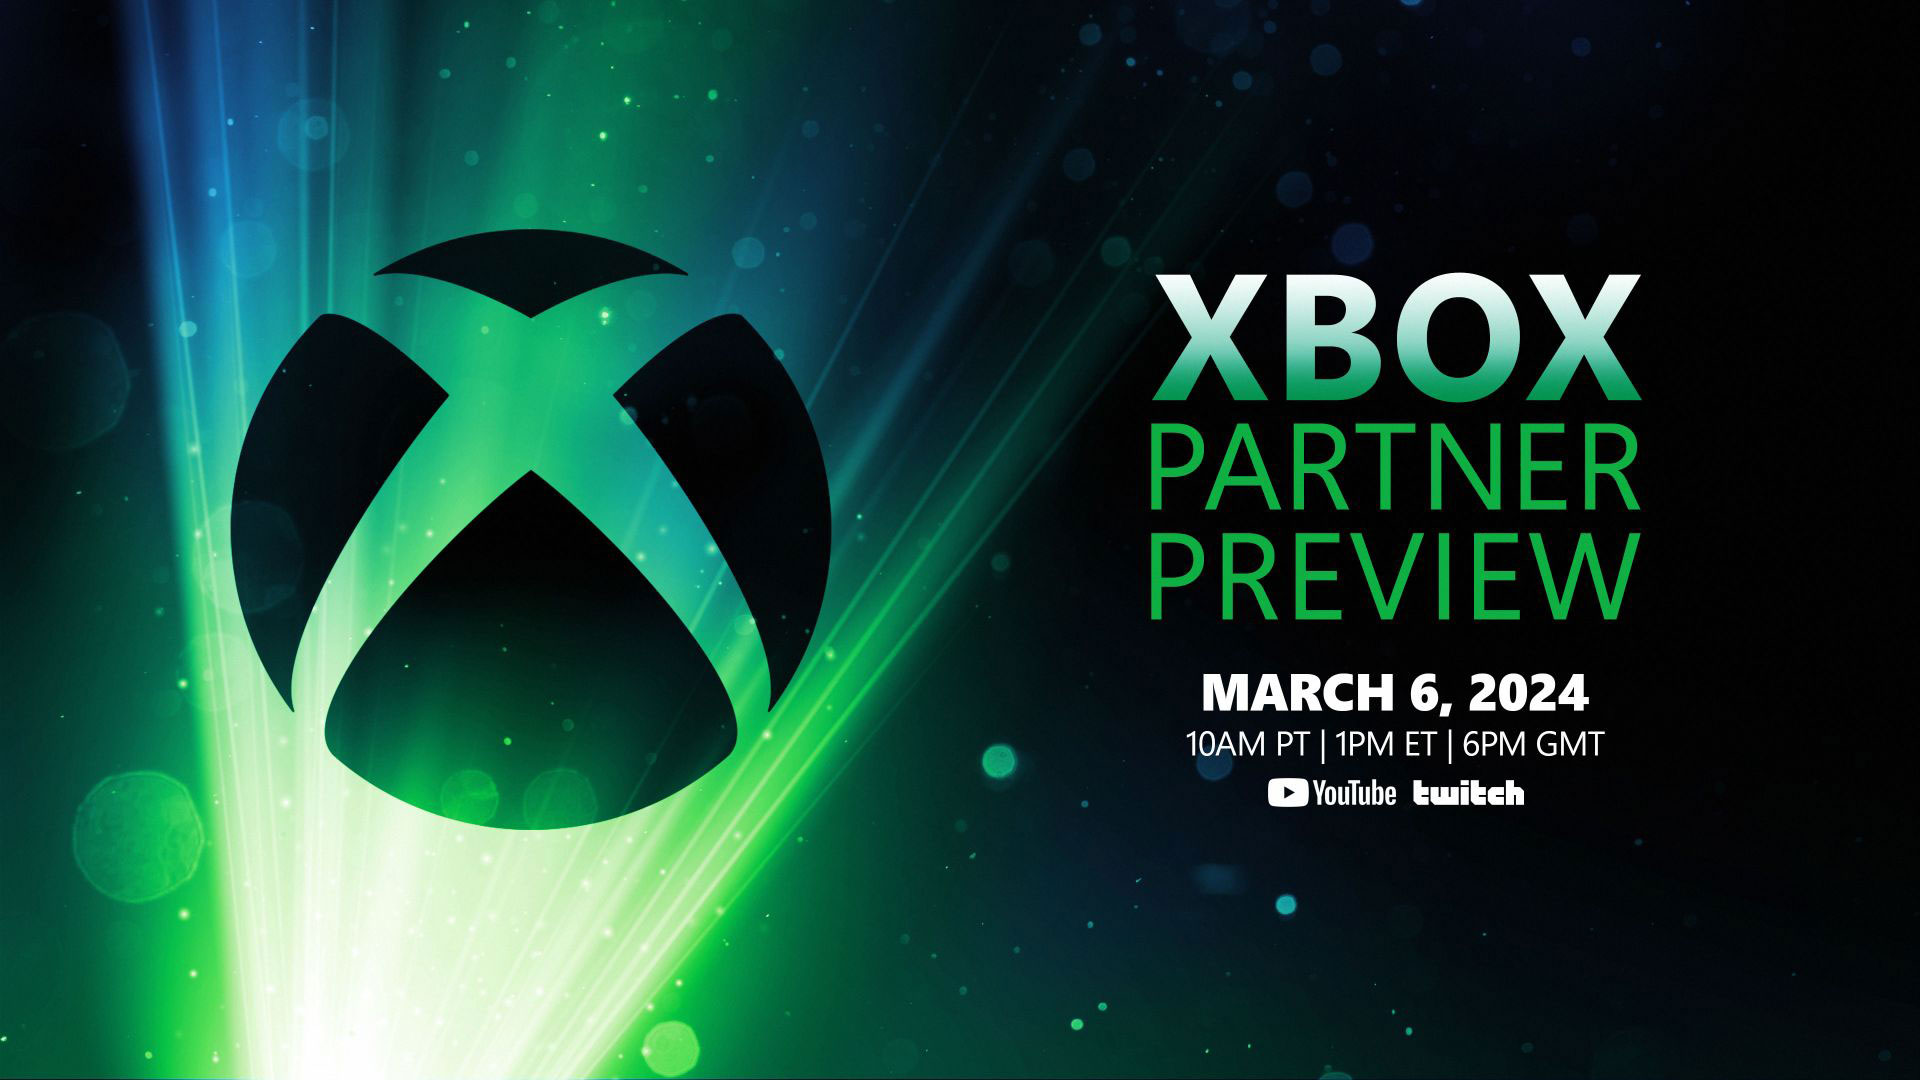 The Xbox Partner Preview event happens March 6, 2024 at 10:00am Pacific (1:00pm Eastern)